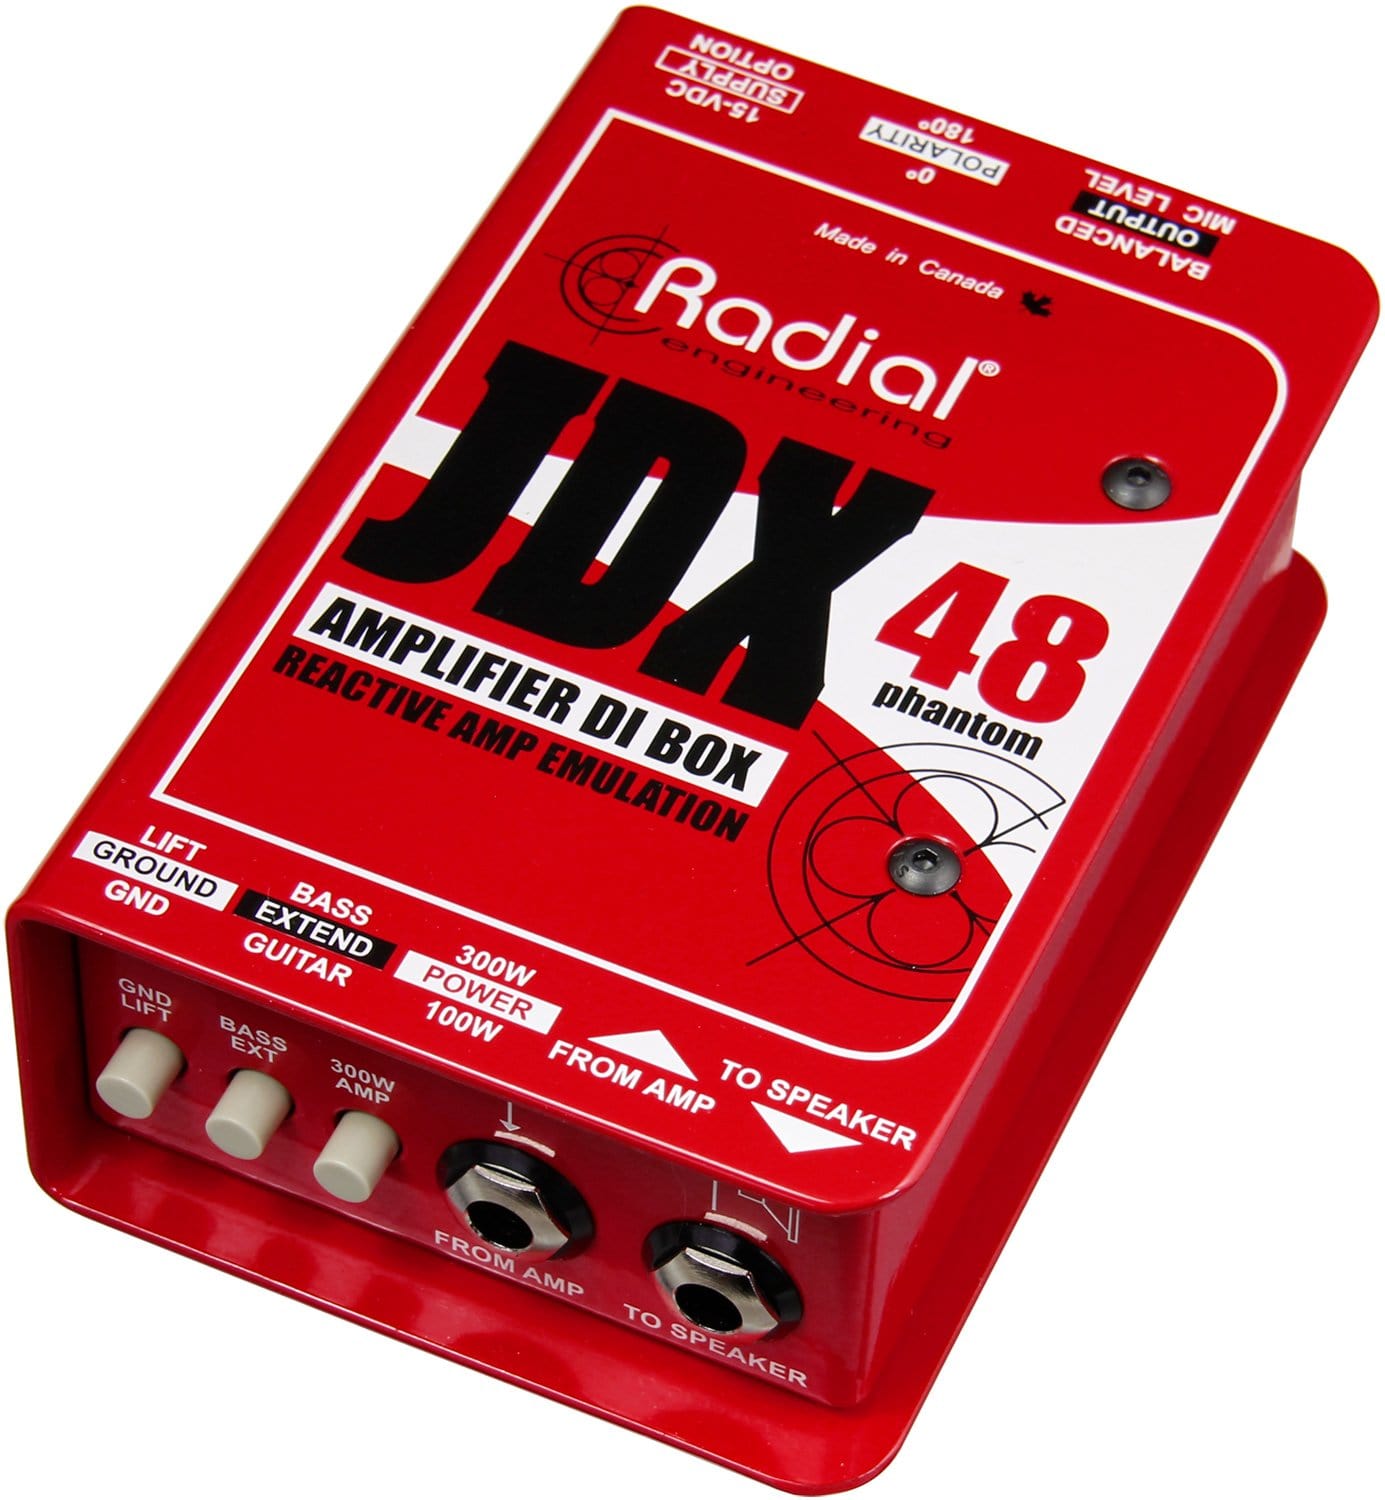 Radial Engineering JDX Guitar Amp Direct Box - PSSL ProSound and Stage Lighting